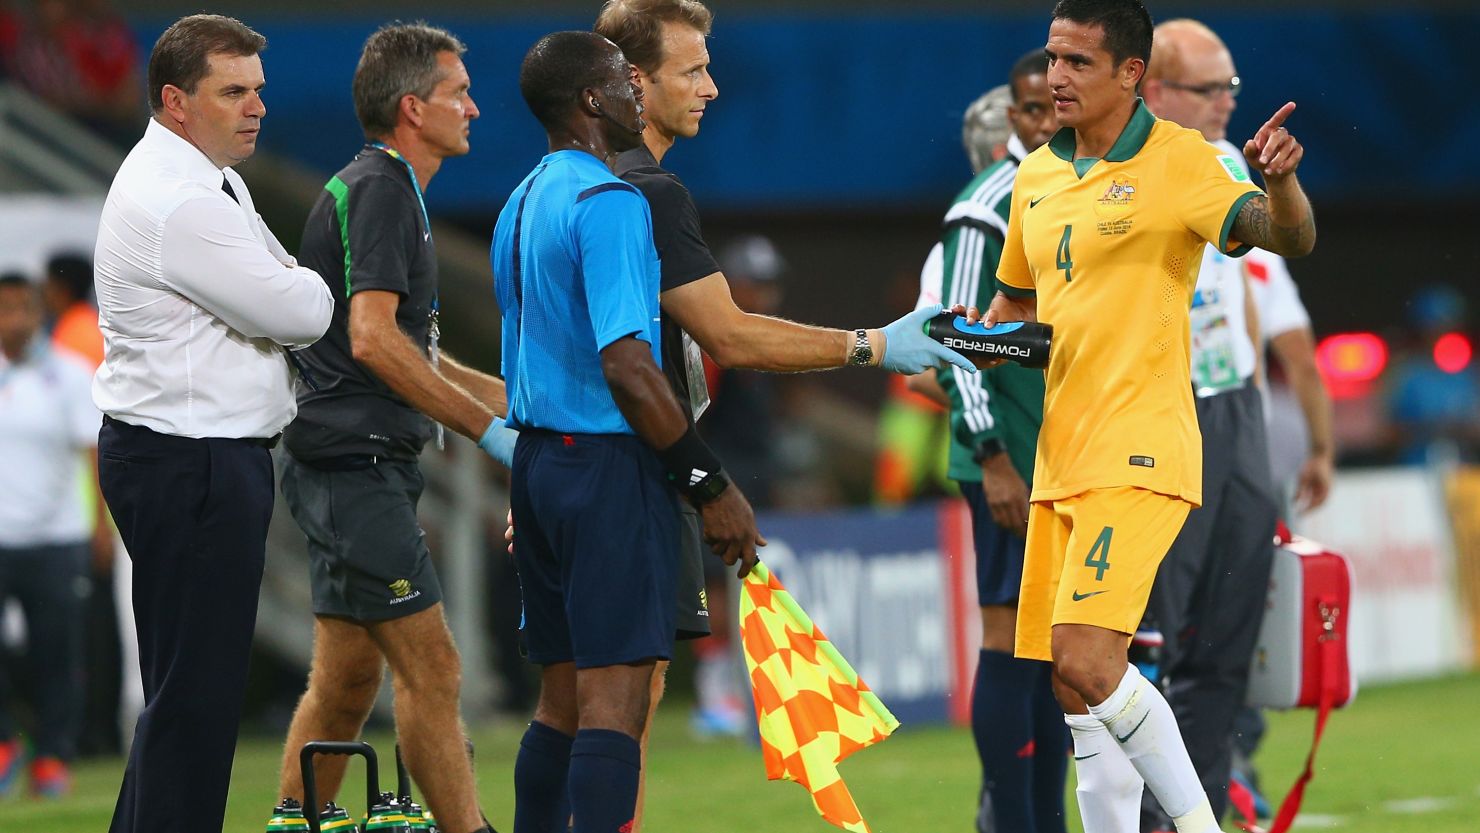 Australia's Tim Cahill appeals to the linesman after a disallowed goal during the Group B match between Chile and Australia at Arena Pantanal on June 13, 2014 in Cuiaba, Brazil. 